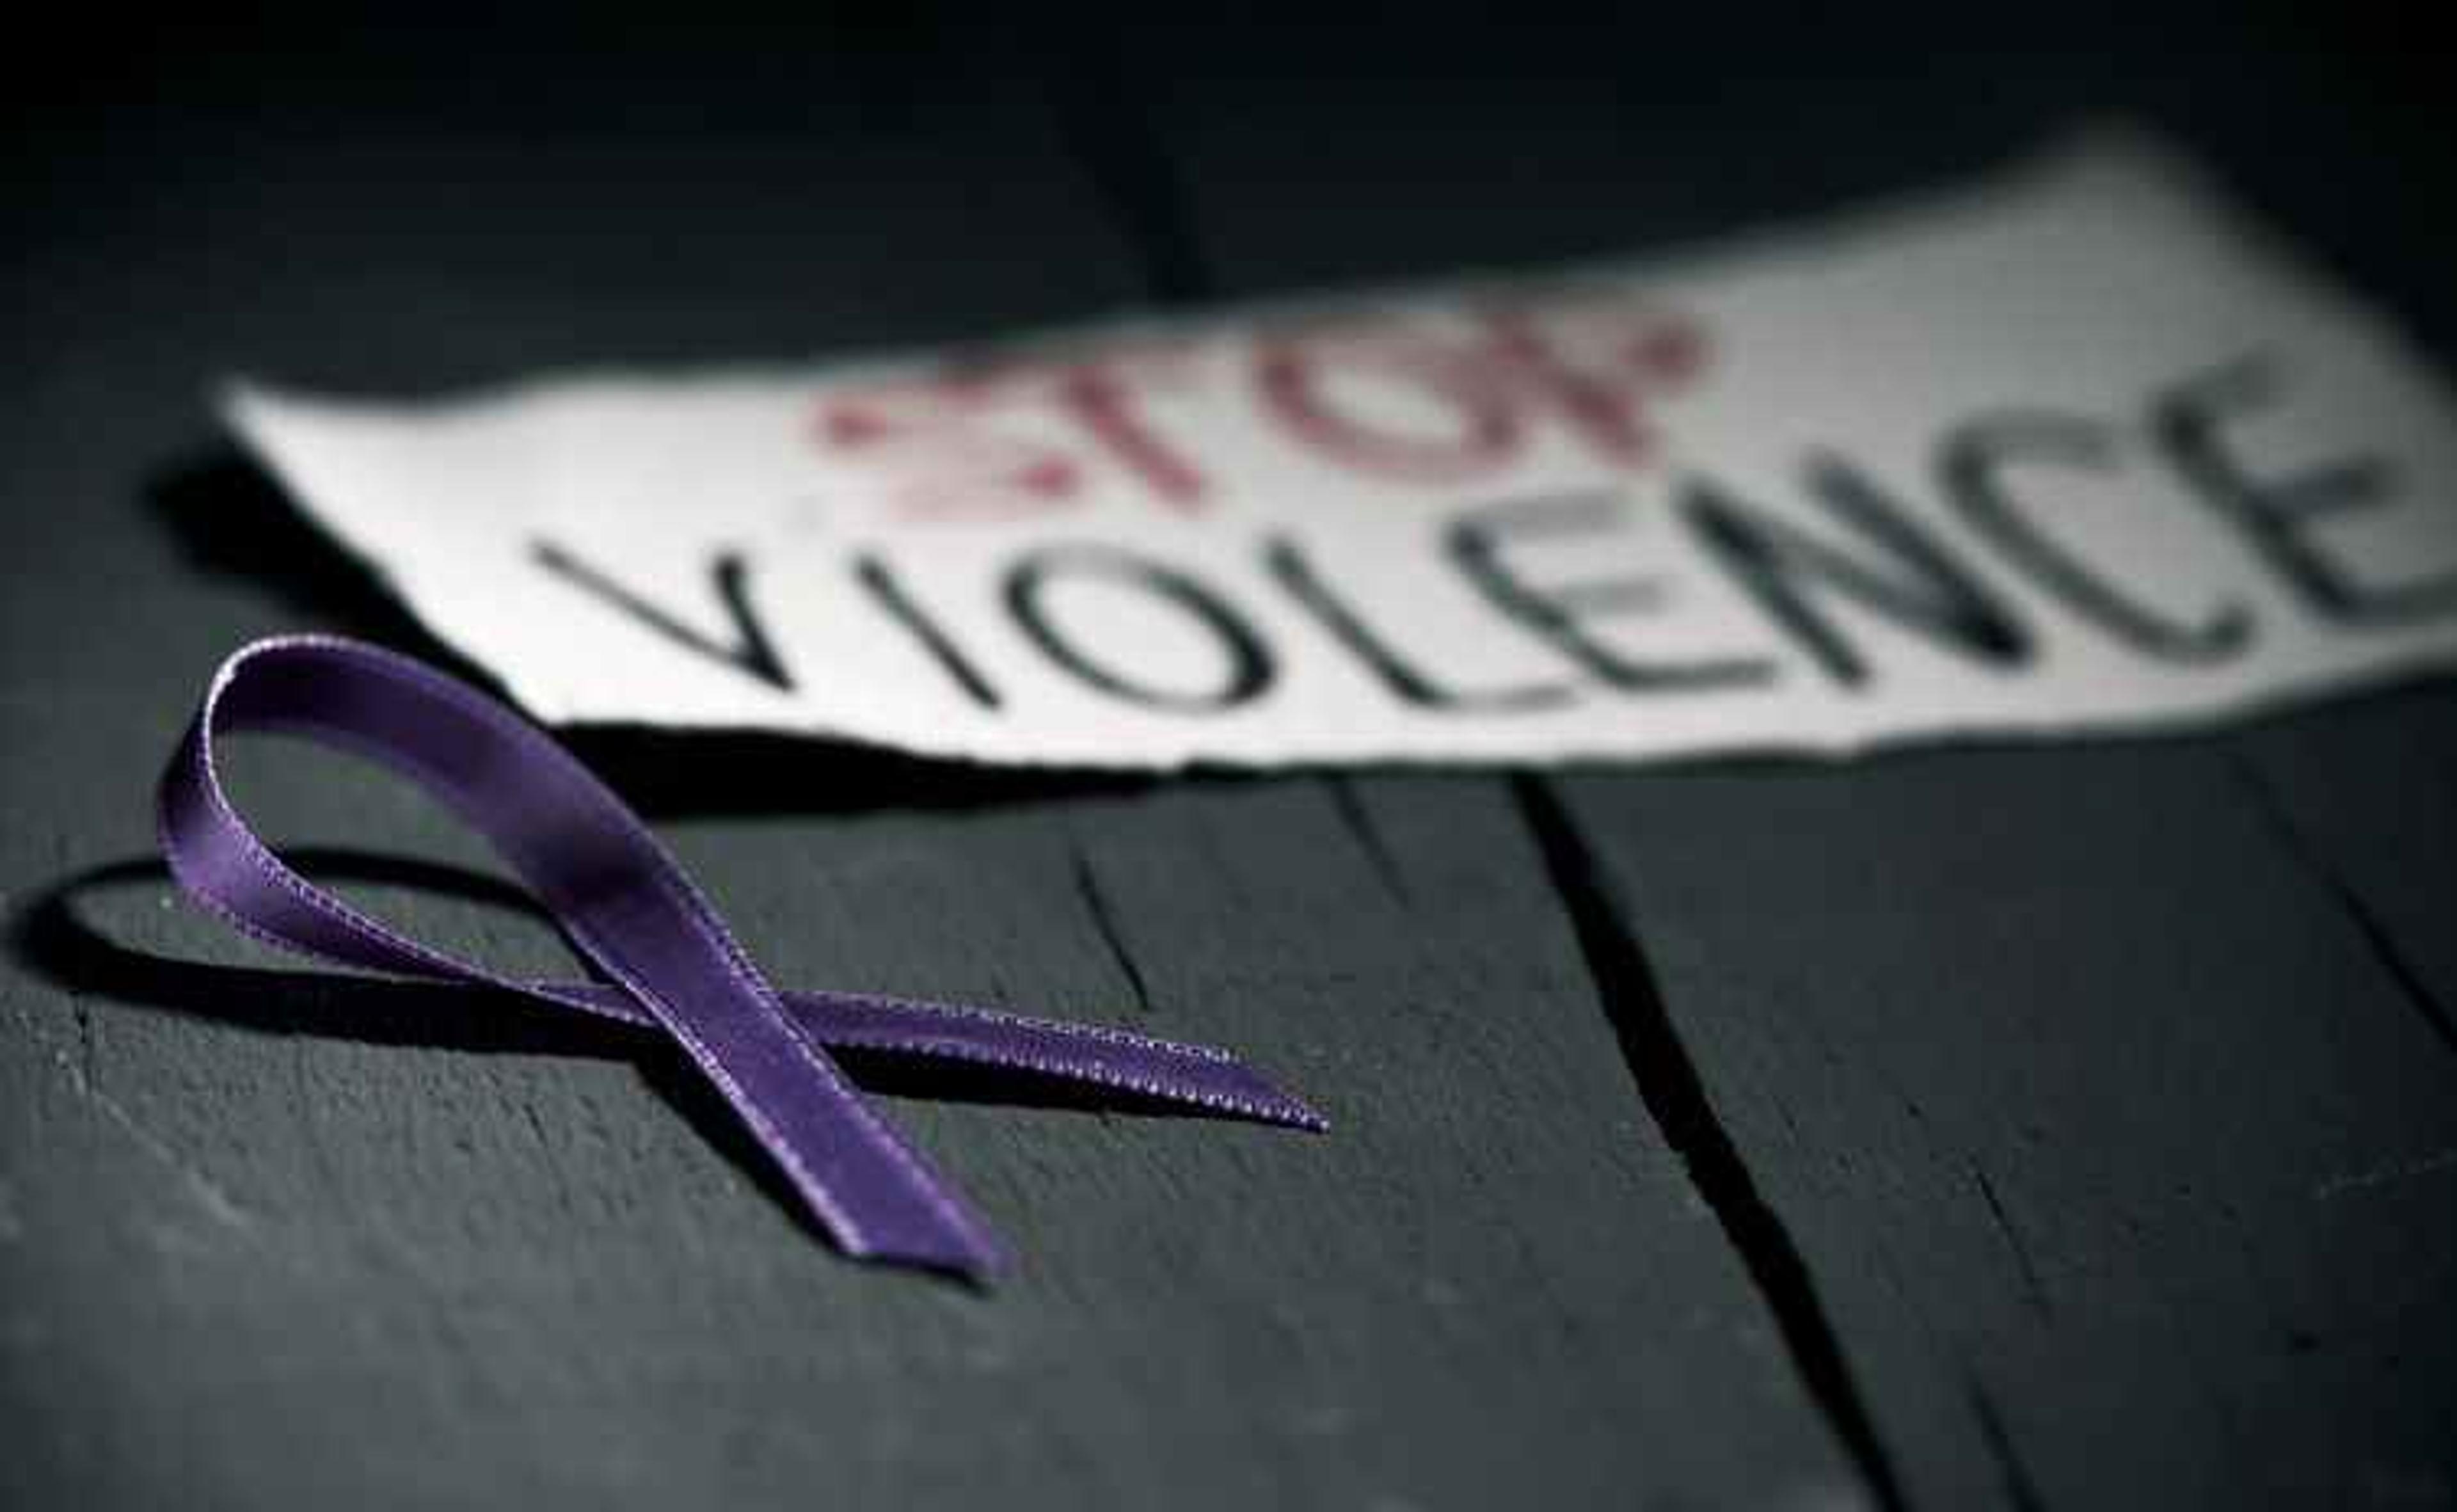 Safety advocates are reminding workplaces of ways to support people experiencing domestic violence. Photo/iStock